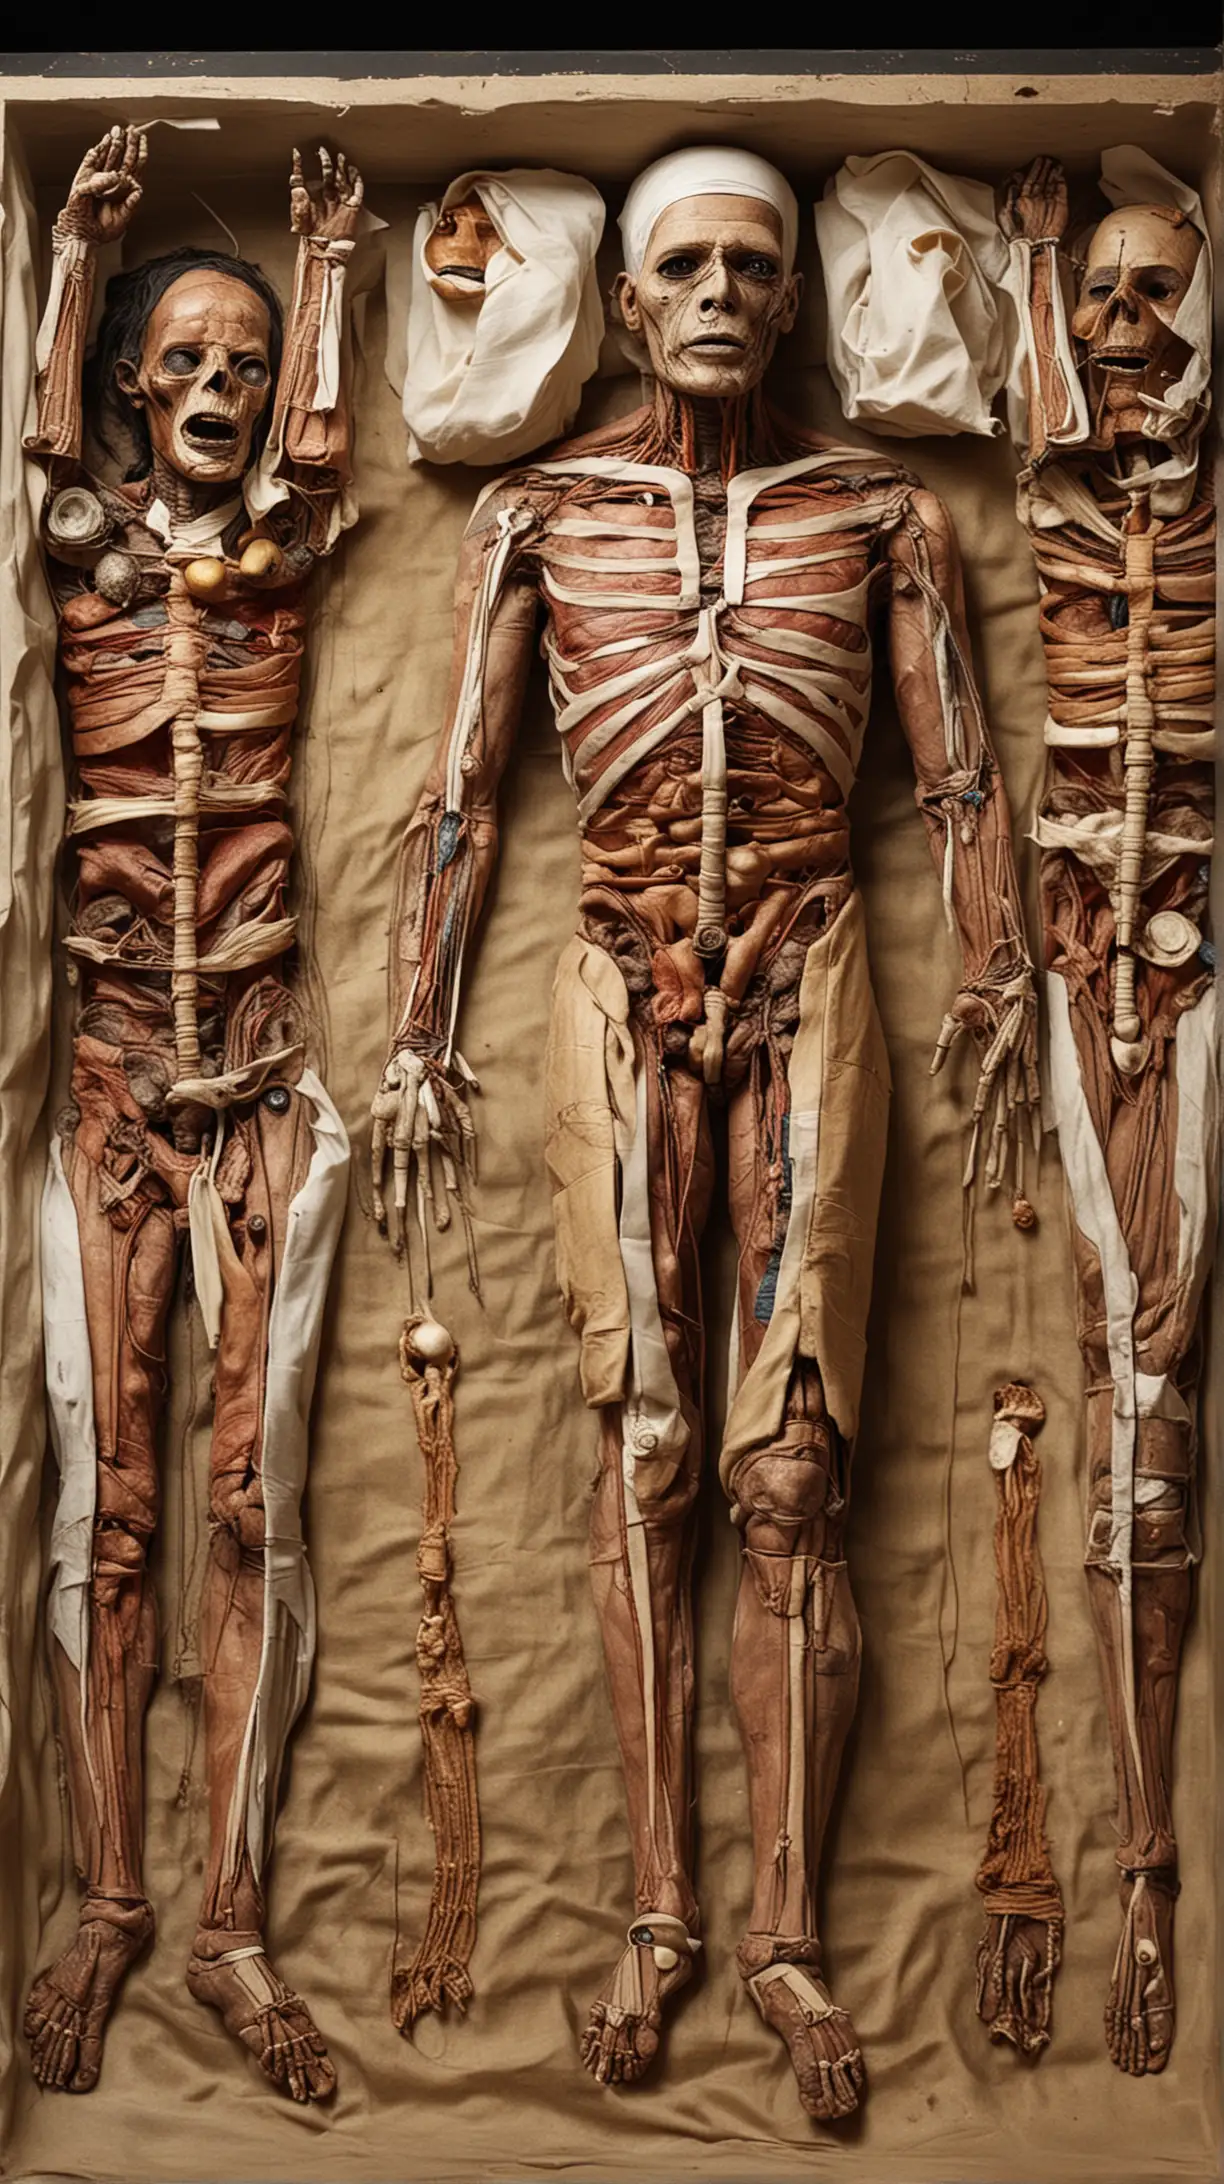 The Embalming Process: Illustrate the various stages of mummification, from the removal of organs to the application of natron and resin. Show the embalmers at work, meticulously preserving the body of the deceased according to ancient Egyptian customs and beliefs. Hyper realistic